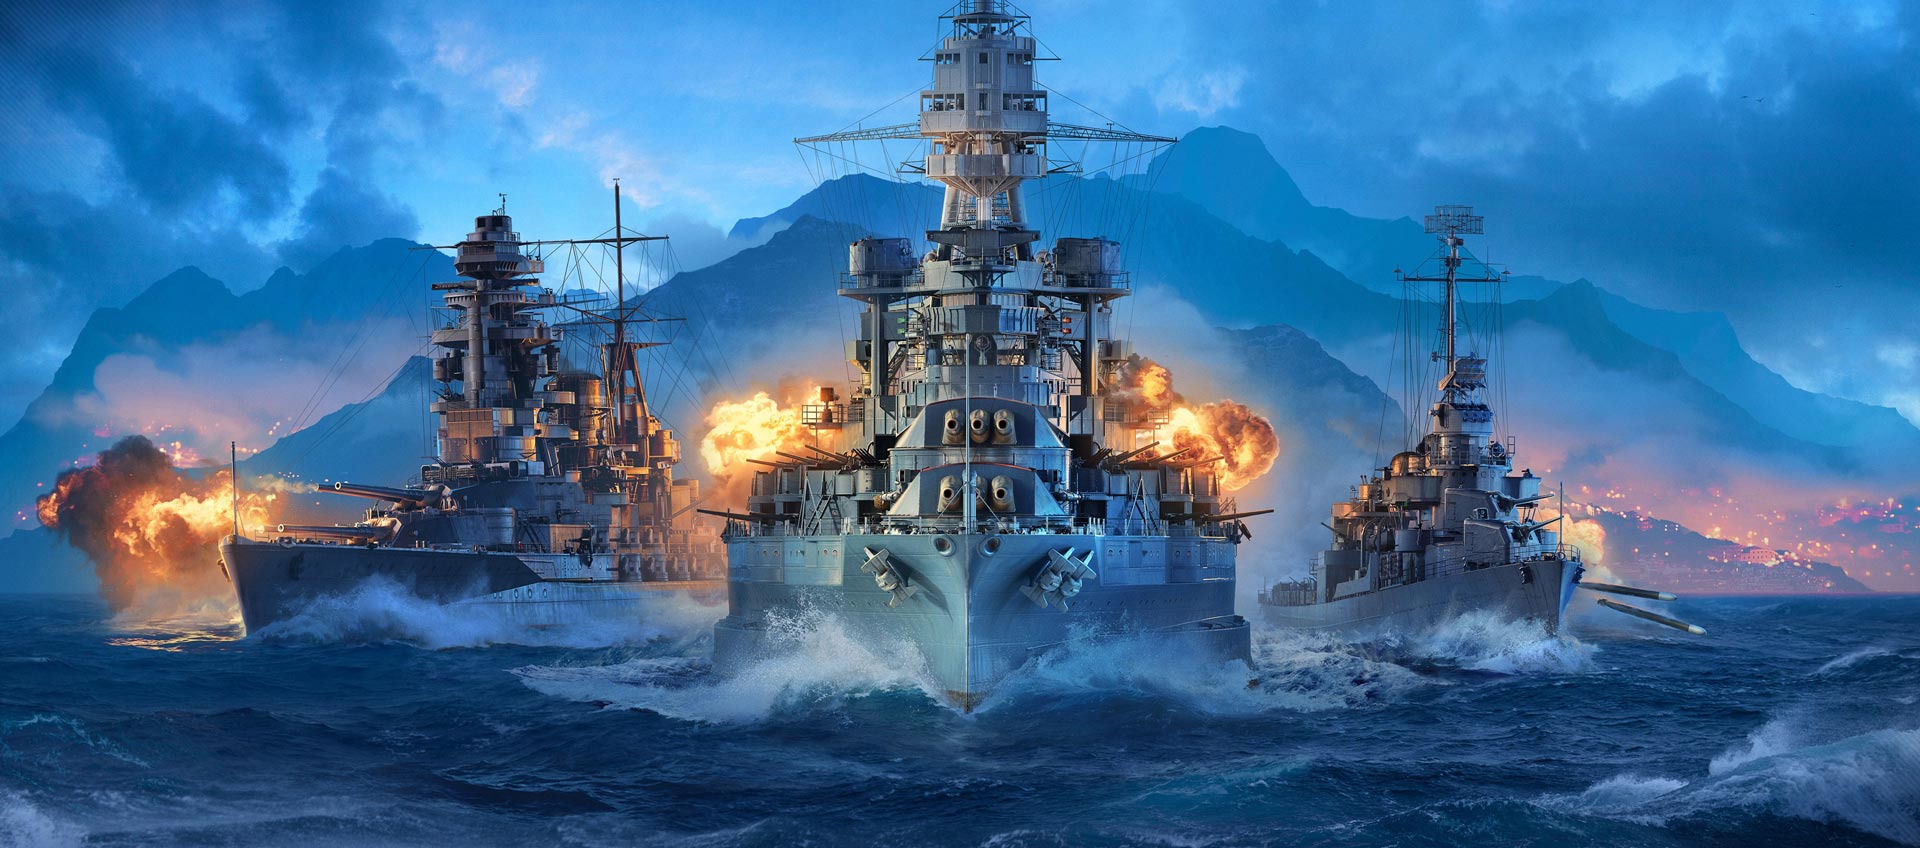 world of warships legends ps4 forum